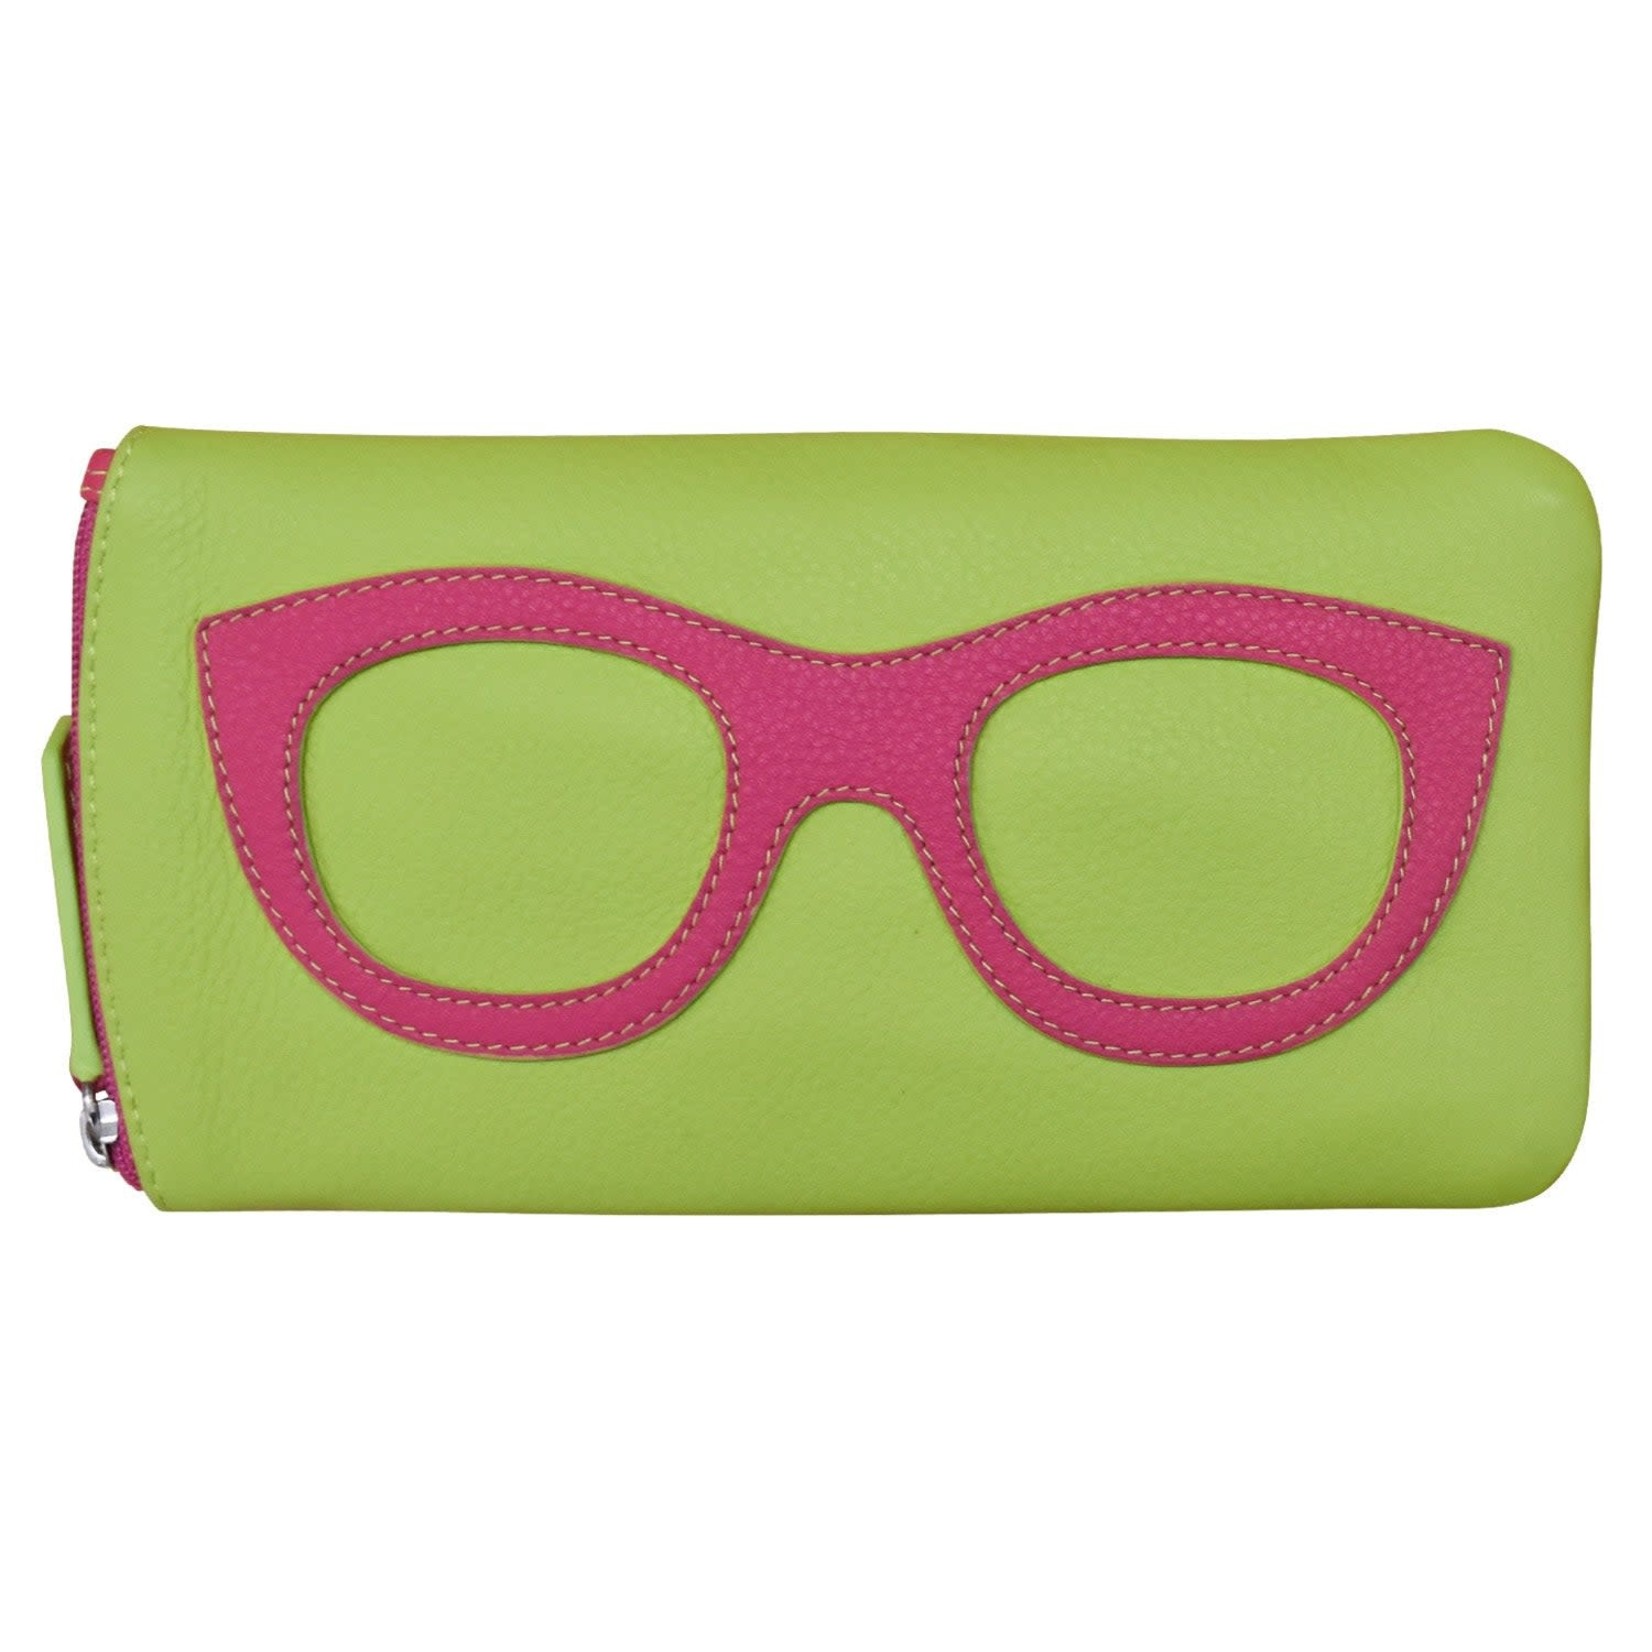 Leather Handbags and Accessories 6462 Pear/Indian Pink - Leather Eyeglass Case